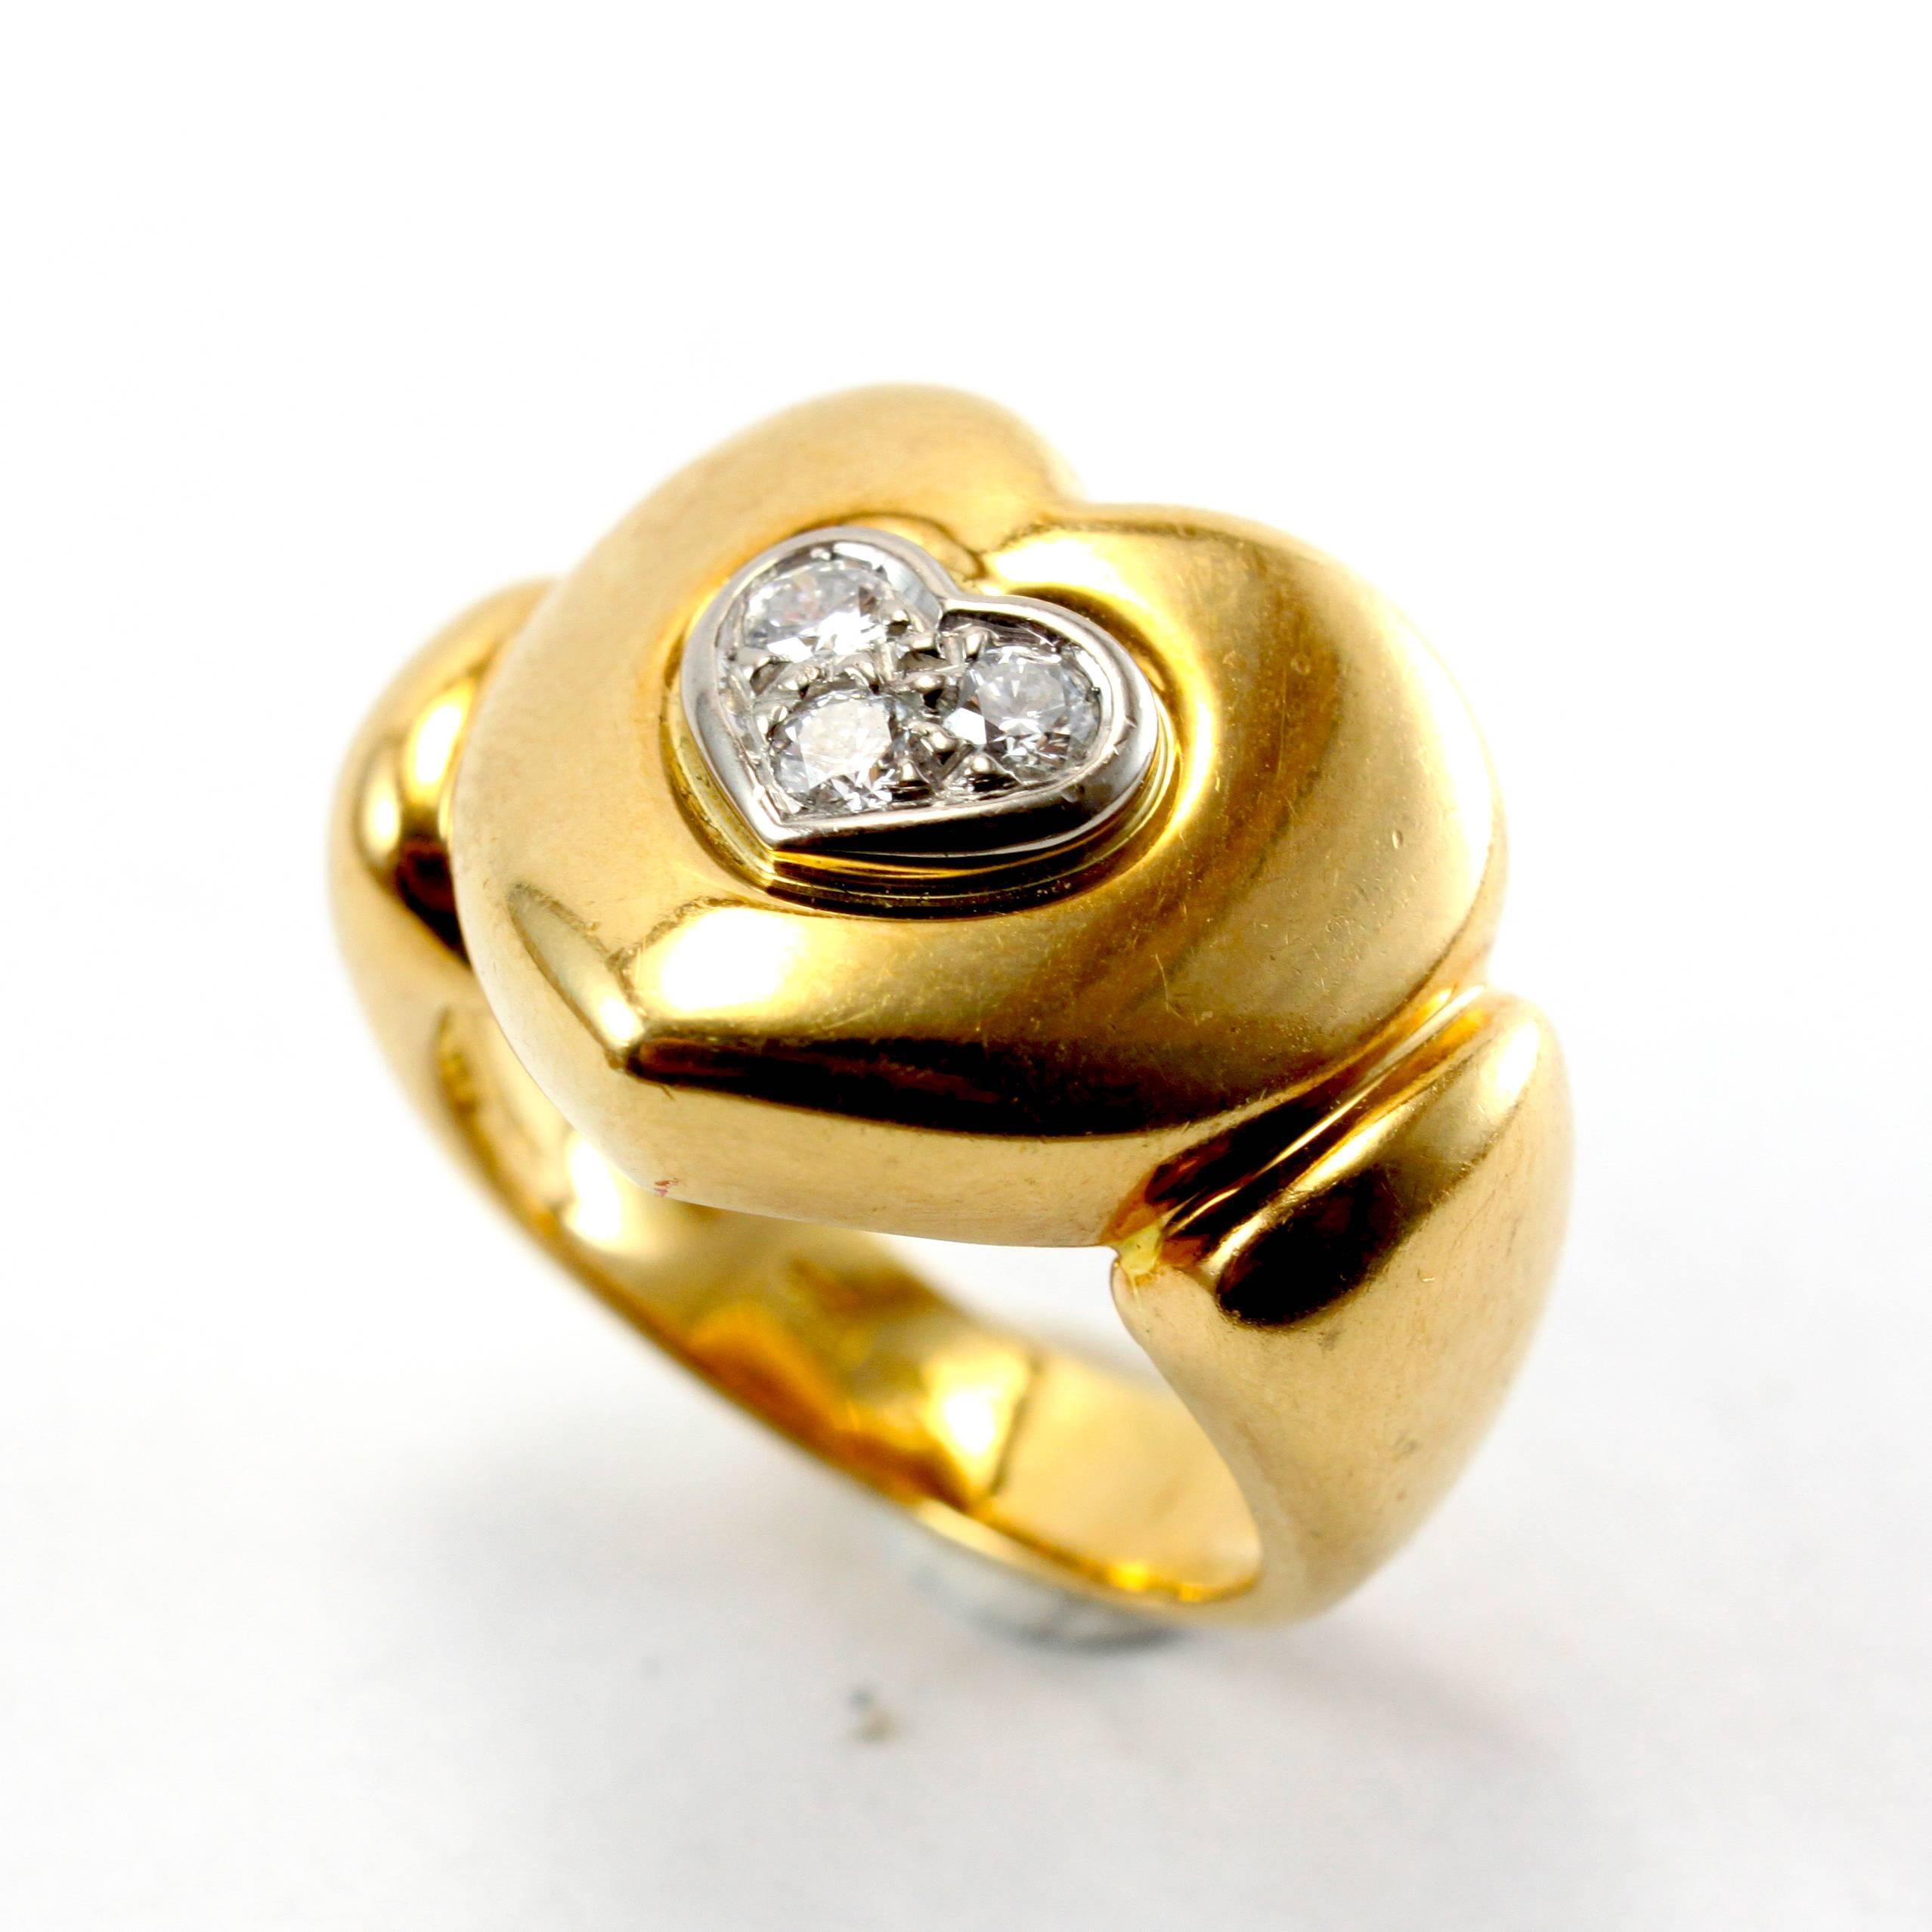 A loving yellow gold 18k heart ring studded with three diamonds of ca. 0.3 carats.

Ring size 6 (can be resized)